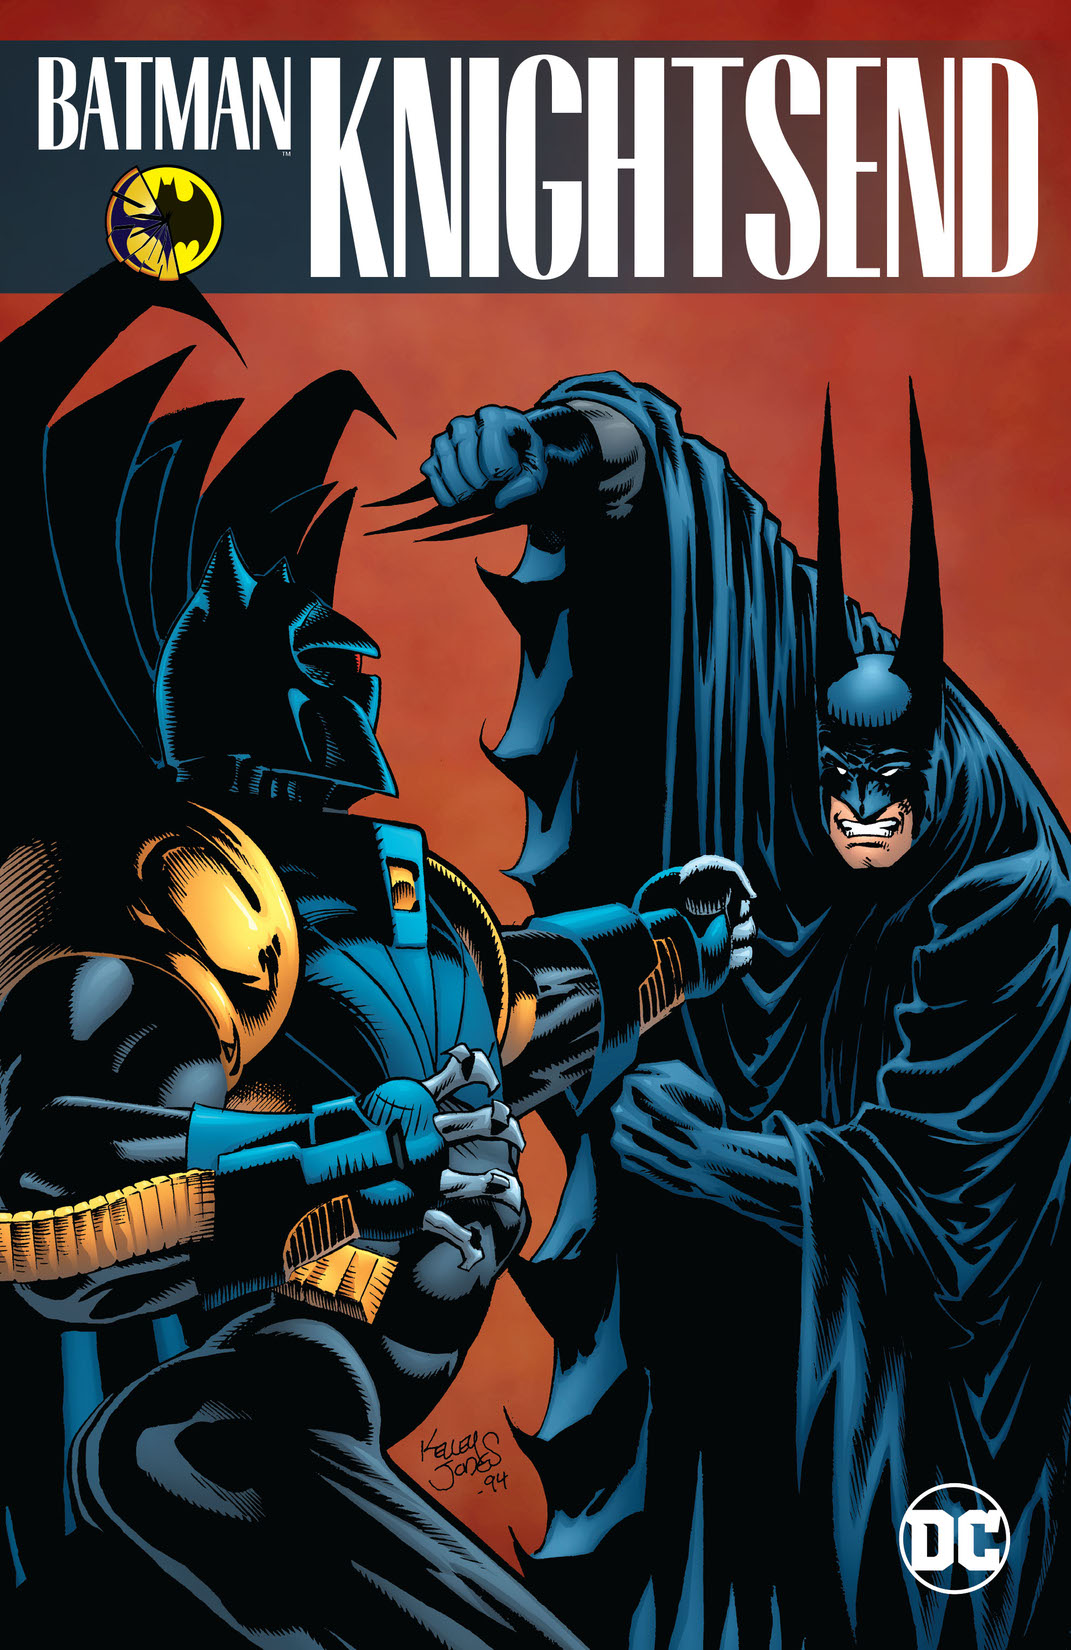 Batman: Knightsend preview images